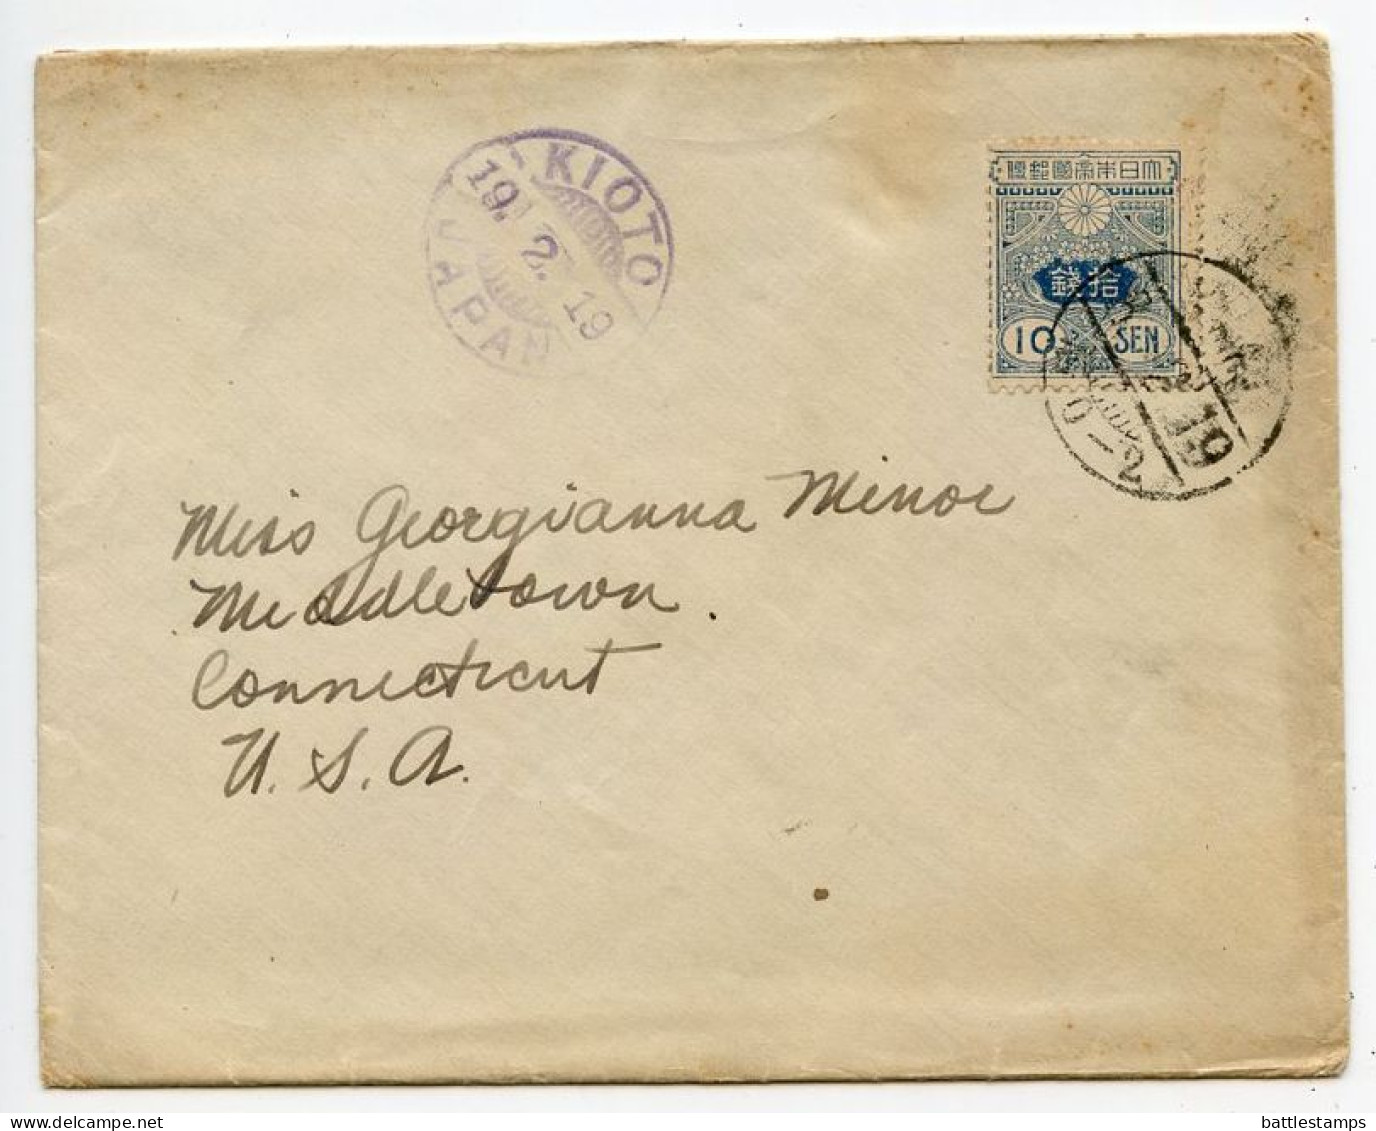 Japan 1919 Cover - Kioto / Kyoto To Middletown, Connecticut; Scott 137 - 10 Sen - Covers & Documents